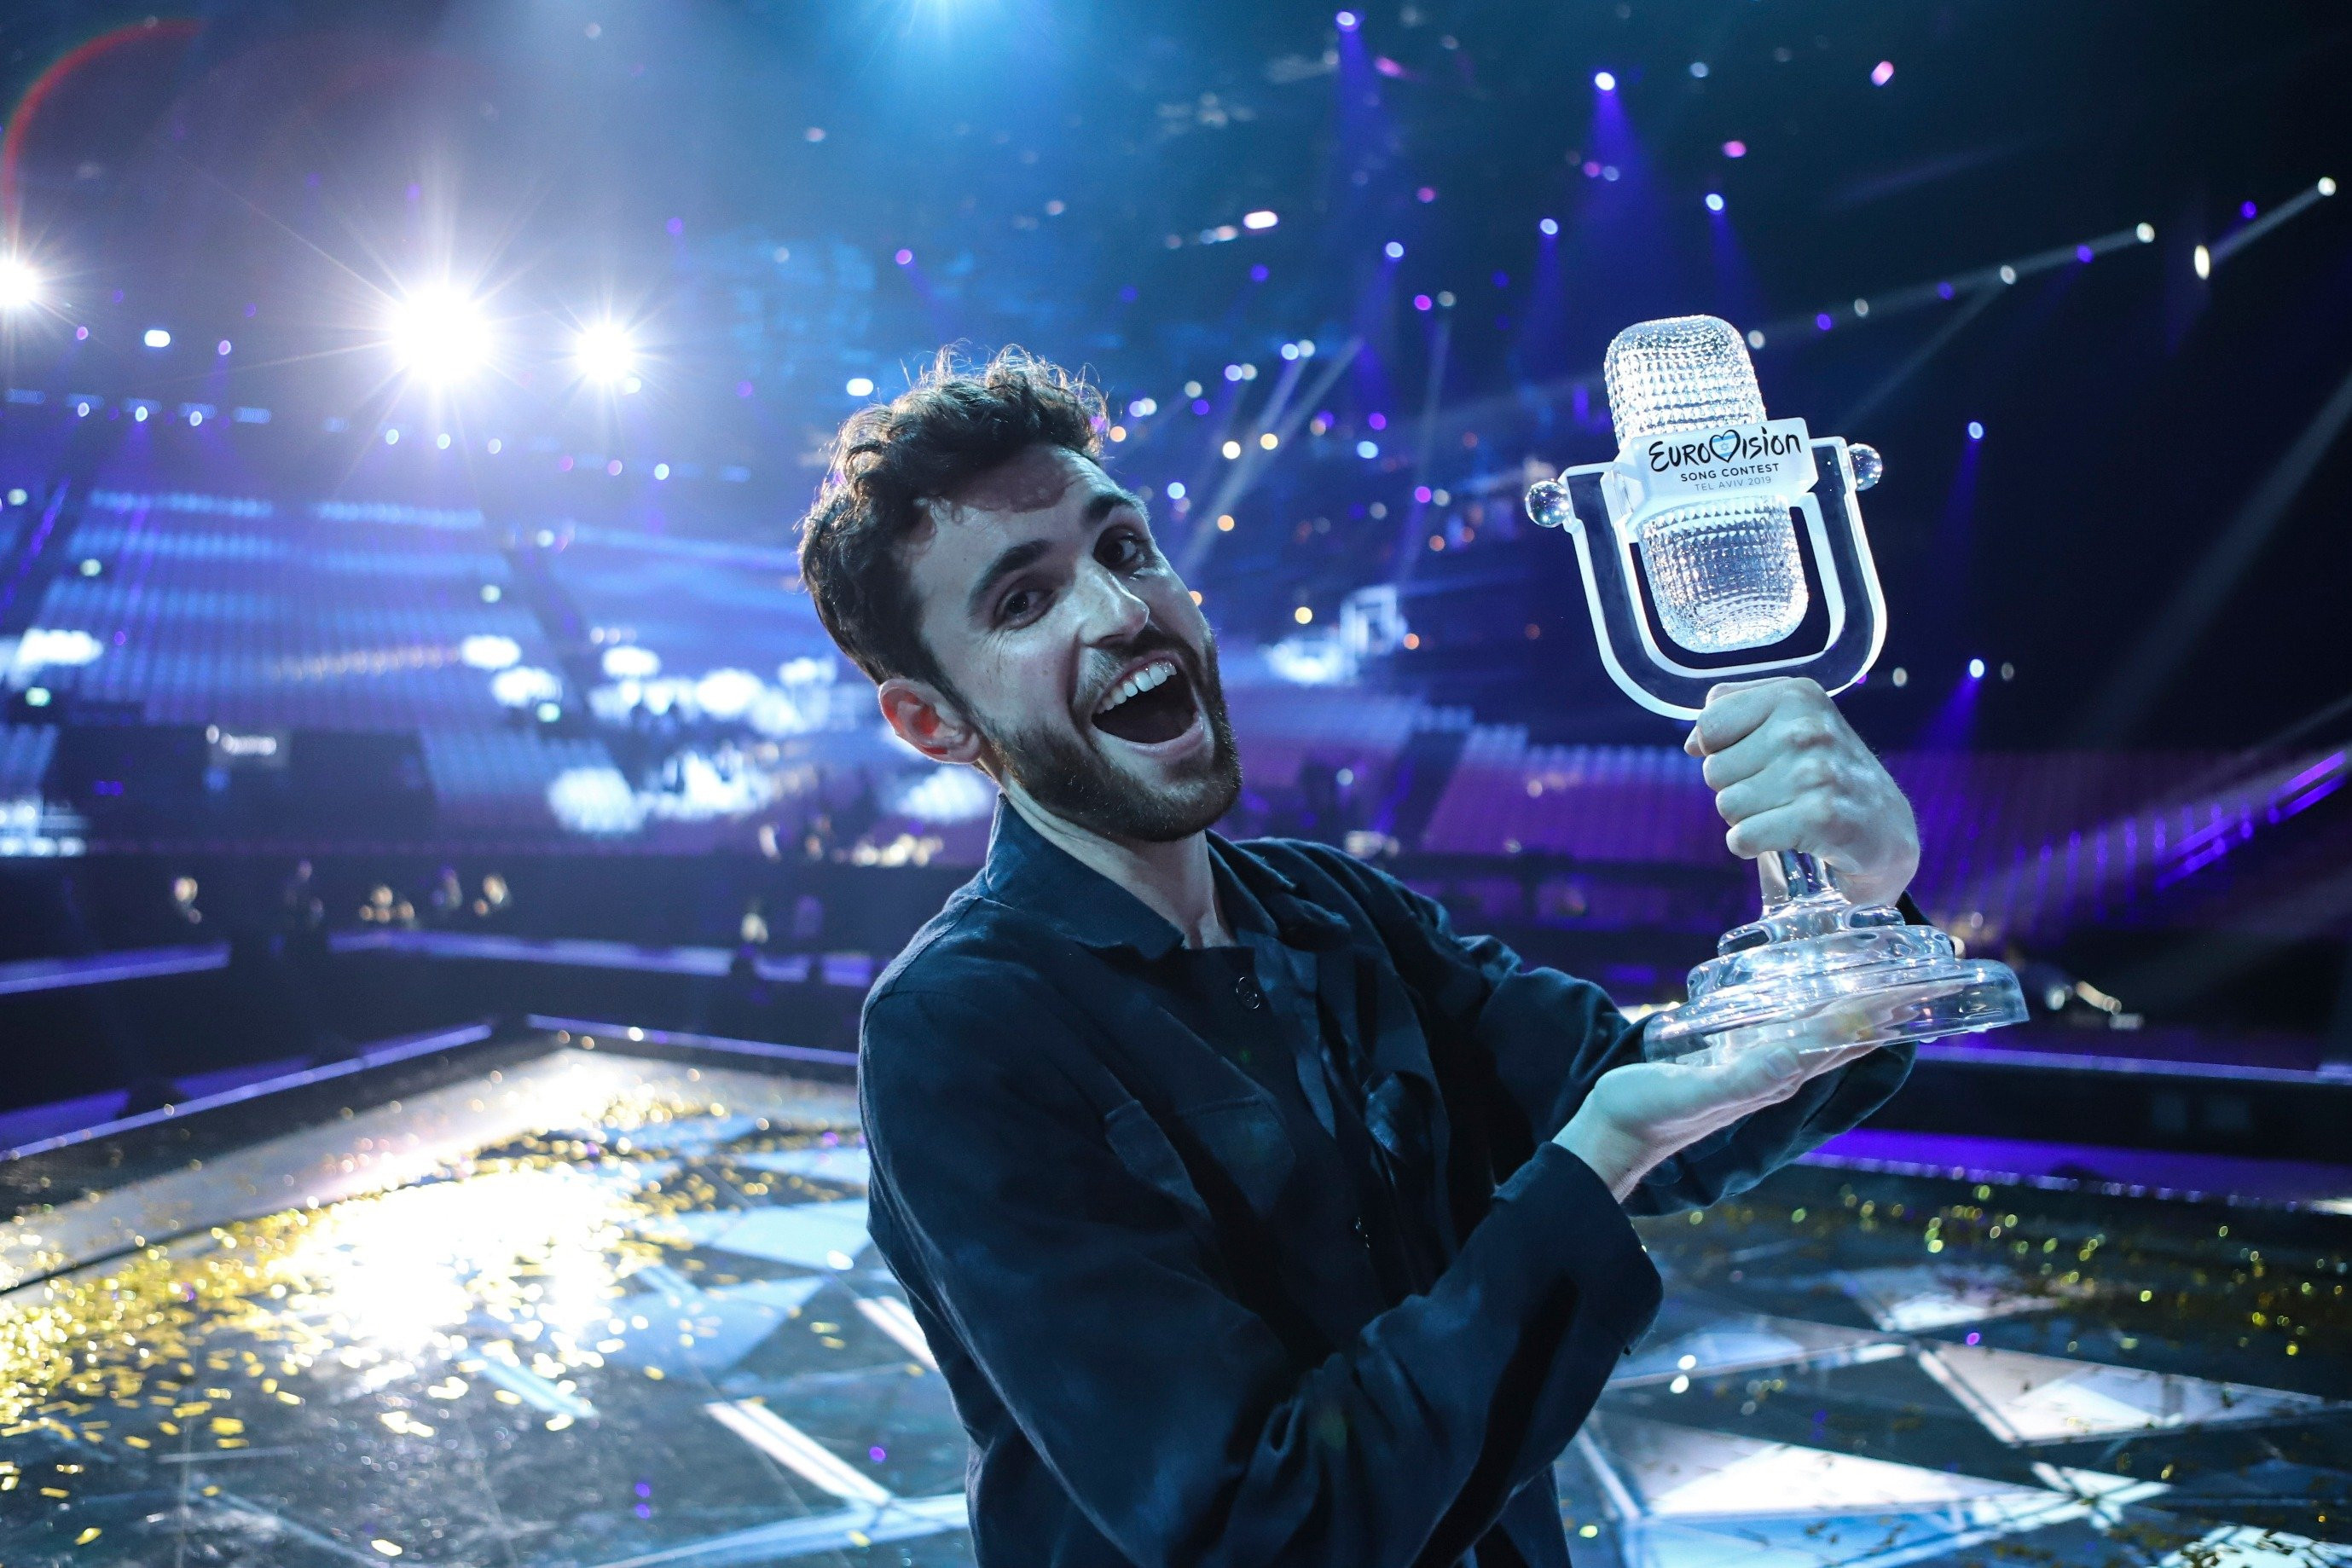 Eurovision bookmakers. Дункан Лоуренс Евровидение. Дункан Лоуренс Евровидение 2020. Duncan Laurence Arcade Евровидение 2019. Дункан Лоуренс 2022.